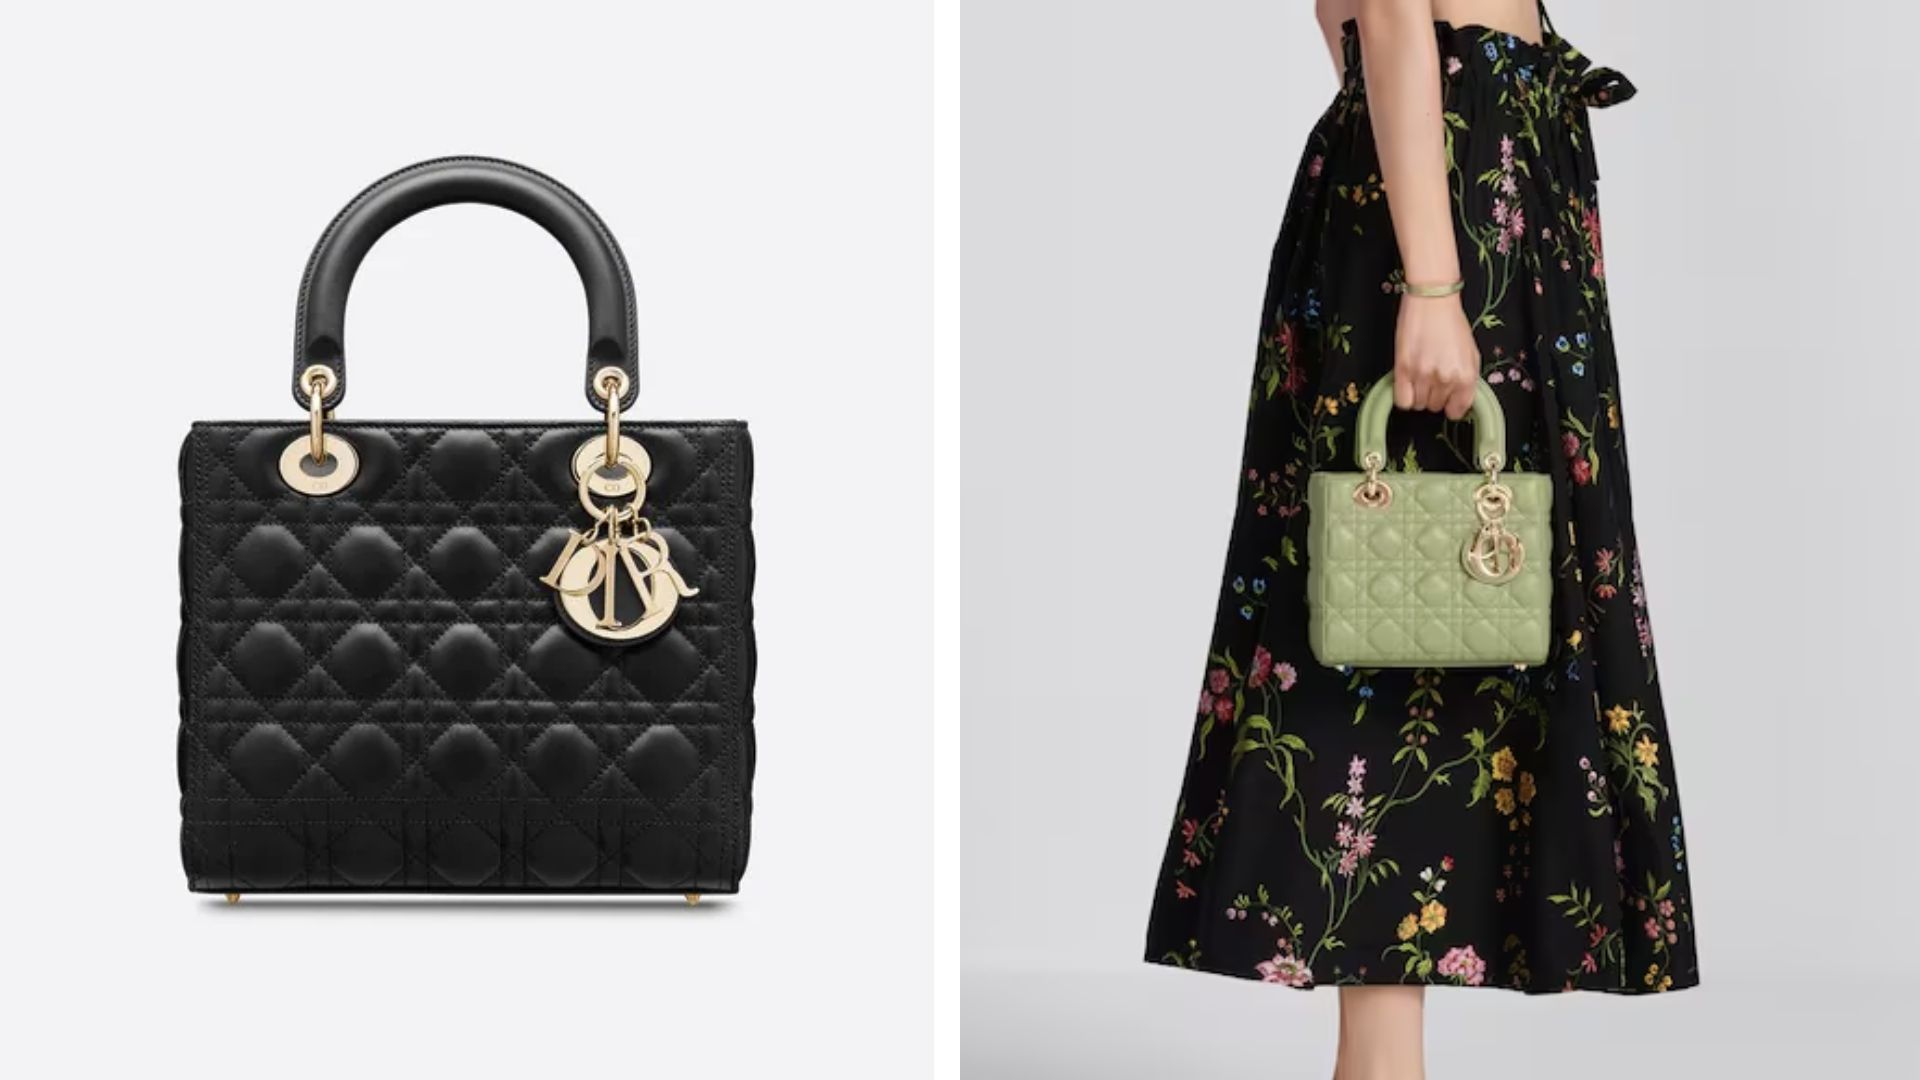 Most iconic bags- Lady Dior